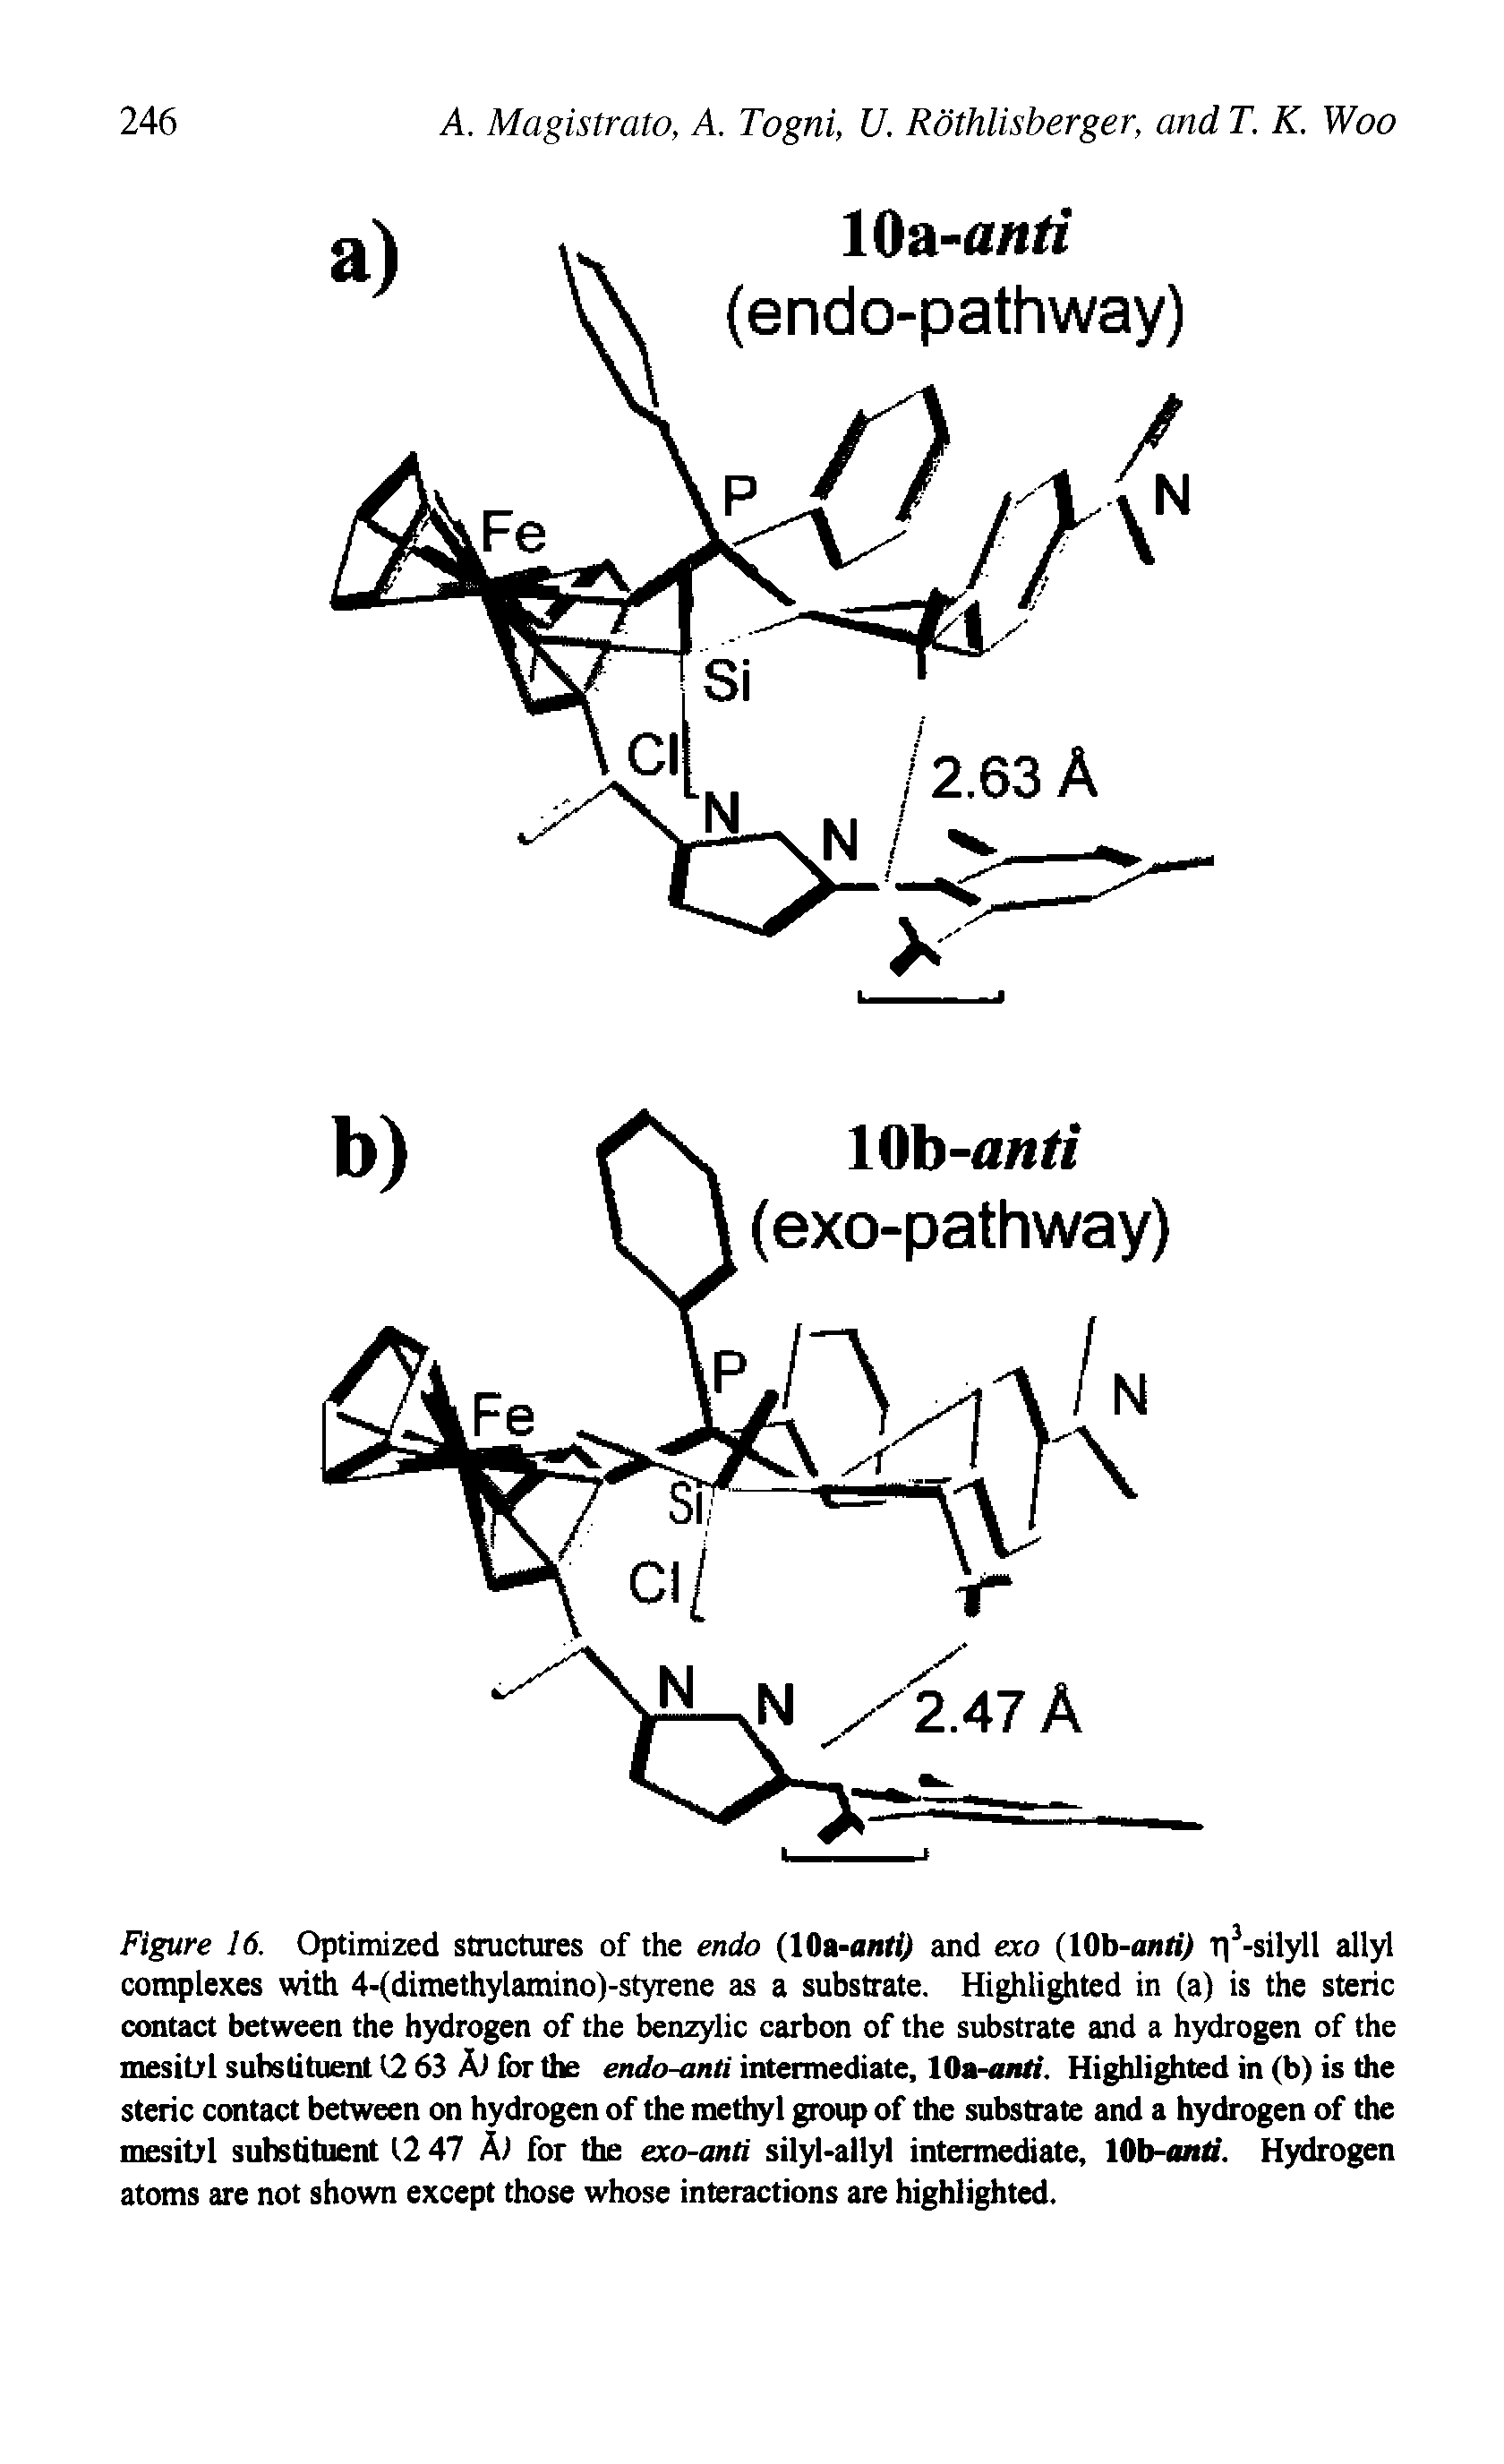 Figure 16. Optimized structures of the endo (lOa-anf and exo (IQb-anti) r -silyll allyl complexes with 4-(dimethylamino)-styrene as a substrate. Highlighted in (a) is the steric contact between the hydrogen of the benzylic carbon of the substrate and a hydrogen of the mesityl substituent 12 63 A) for the endo-anti intermediate, lOa-on/i. Highlighted in (b) is the steric contact between on hydrogen of the methyl group of the substrate and a hydrogen of the mesityl suhstituent 12 47 A) for the exo-anti silyl-allyl intermediate, Wb-anti. Hydrogen atoms are not shown except those whose interactions are highlighted.